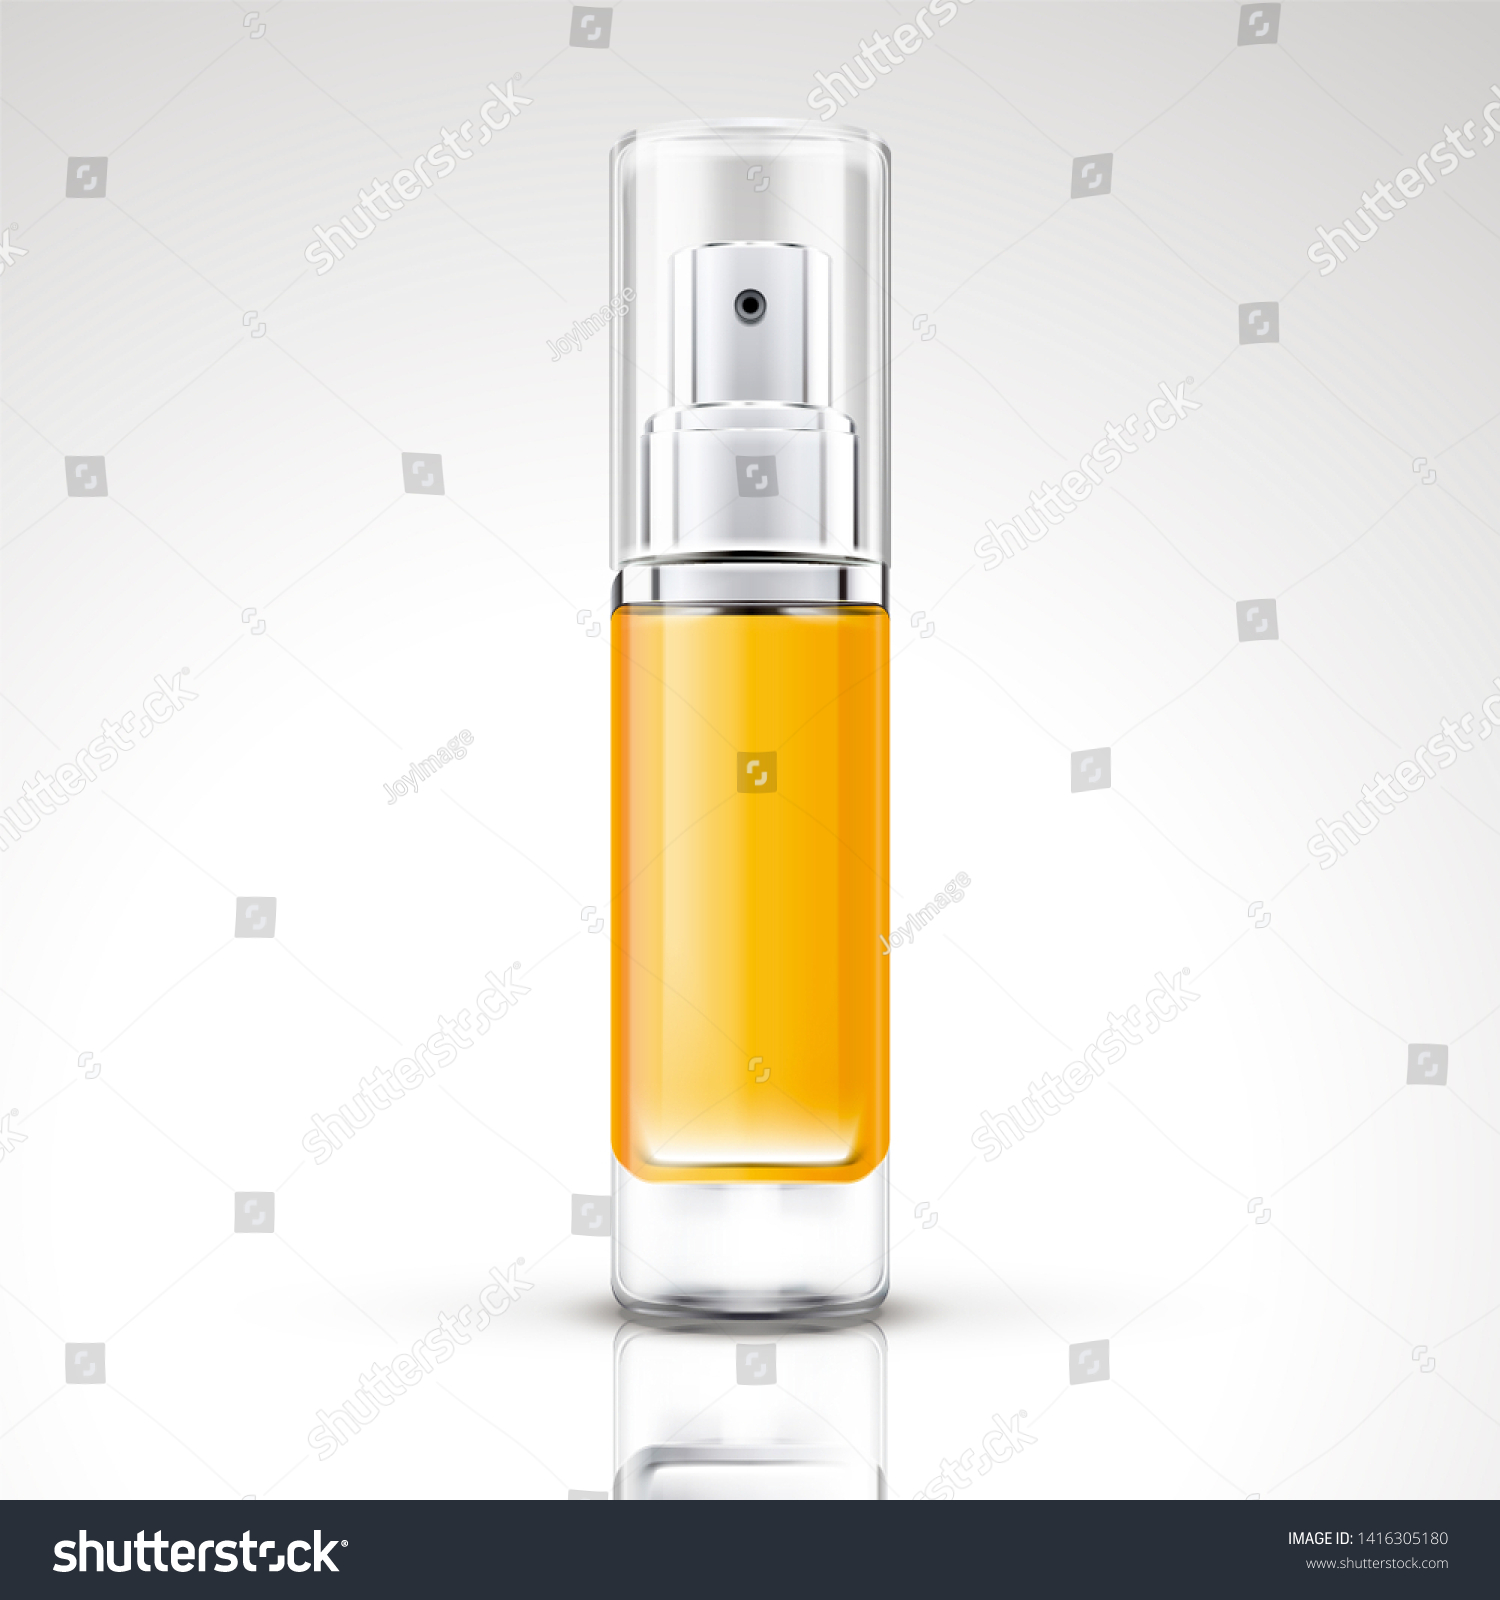 Download Chrome Yellow Spray Bottle Package Design Stock Illustration 1416305180 PSD Mockup Templates